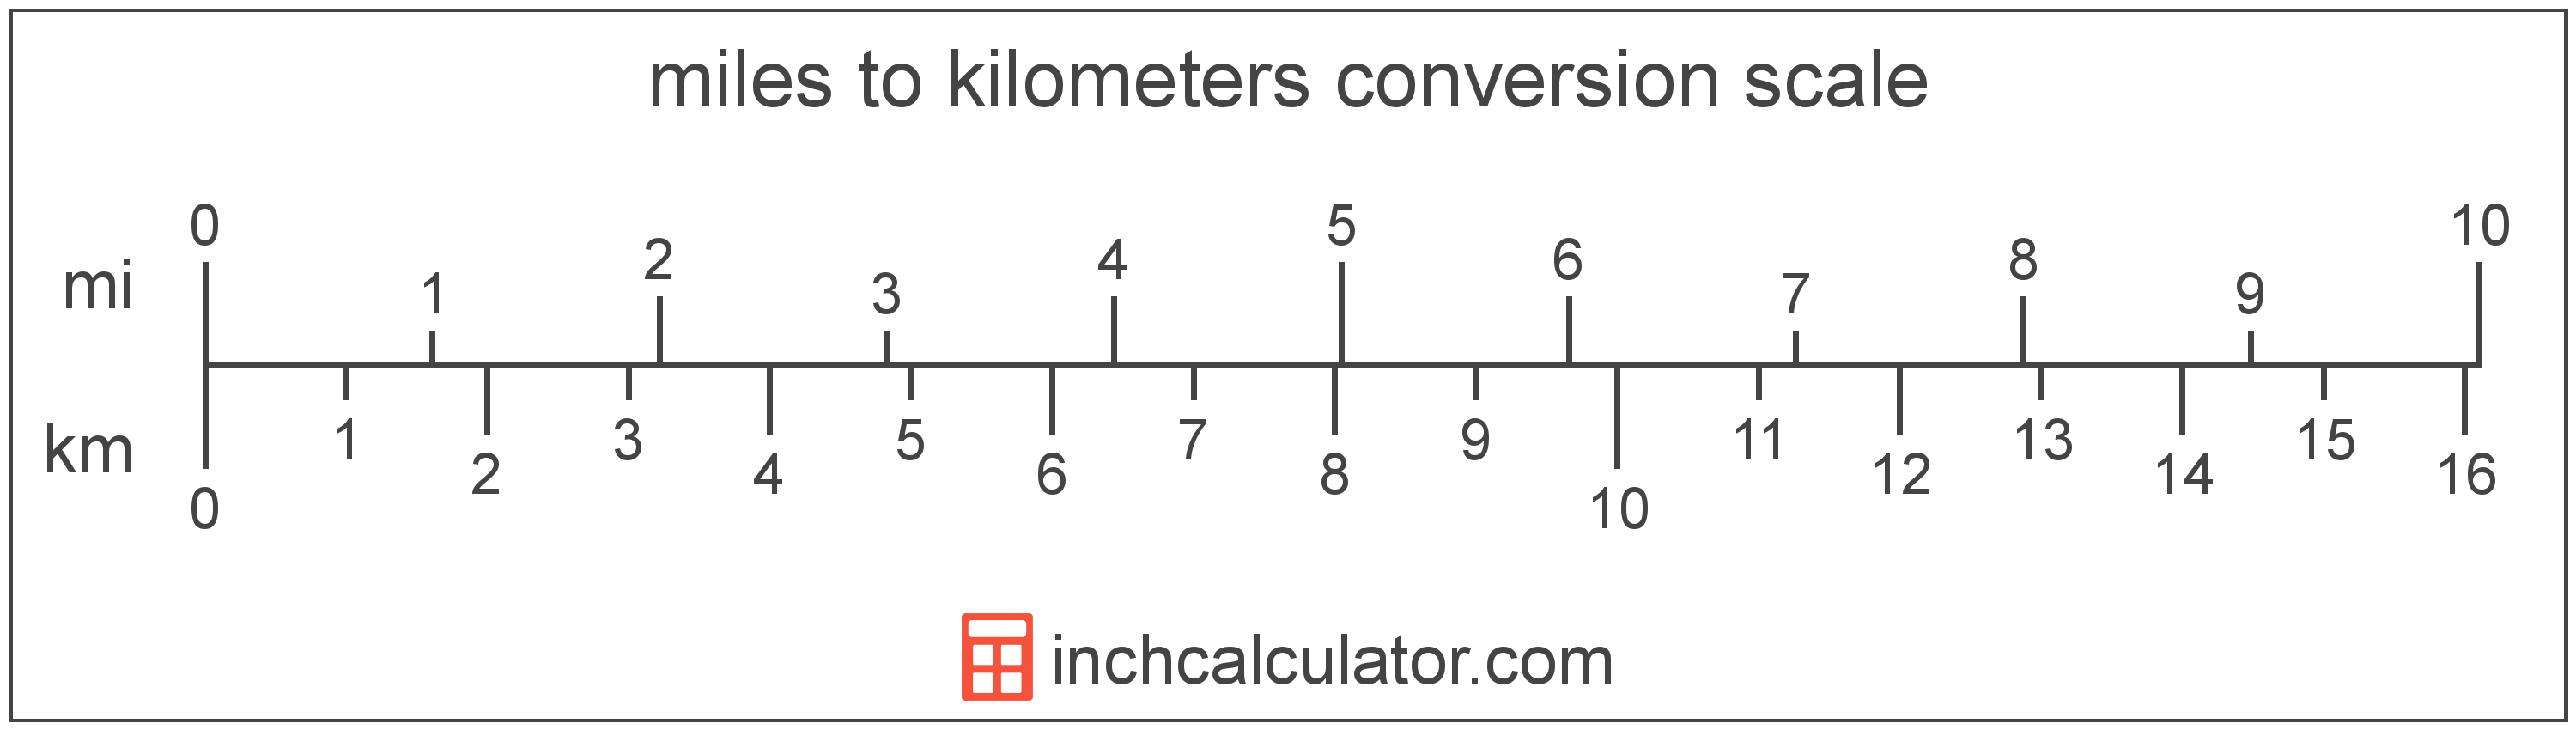 conversion scale showing miles and equivalent kilometers length values